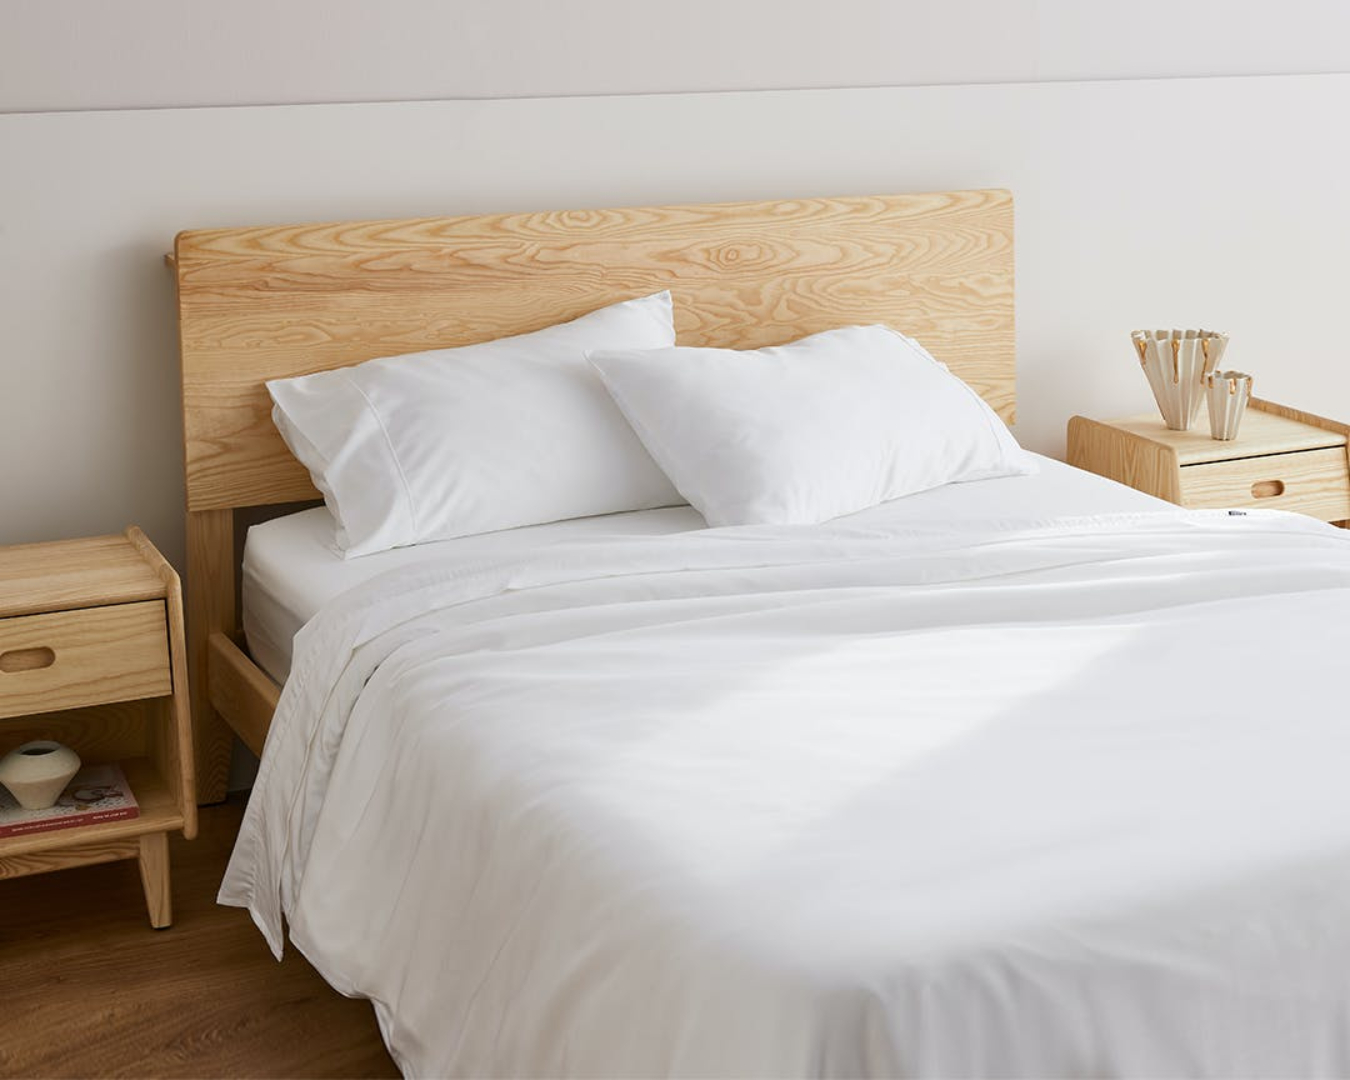 The pure bamboo sheets from Ecosa are smooth and inviting in classic white